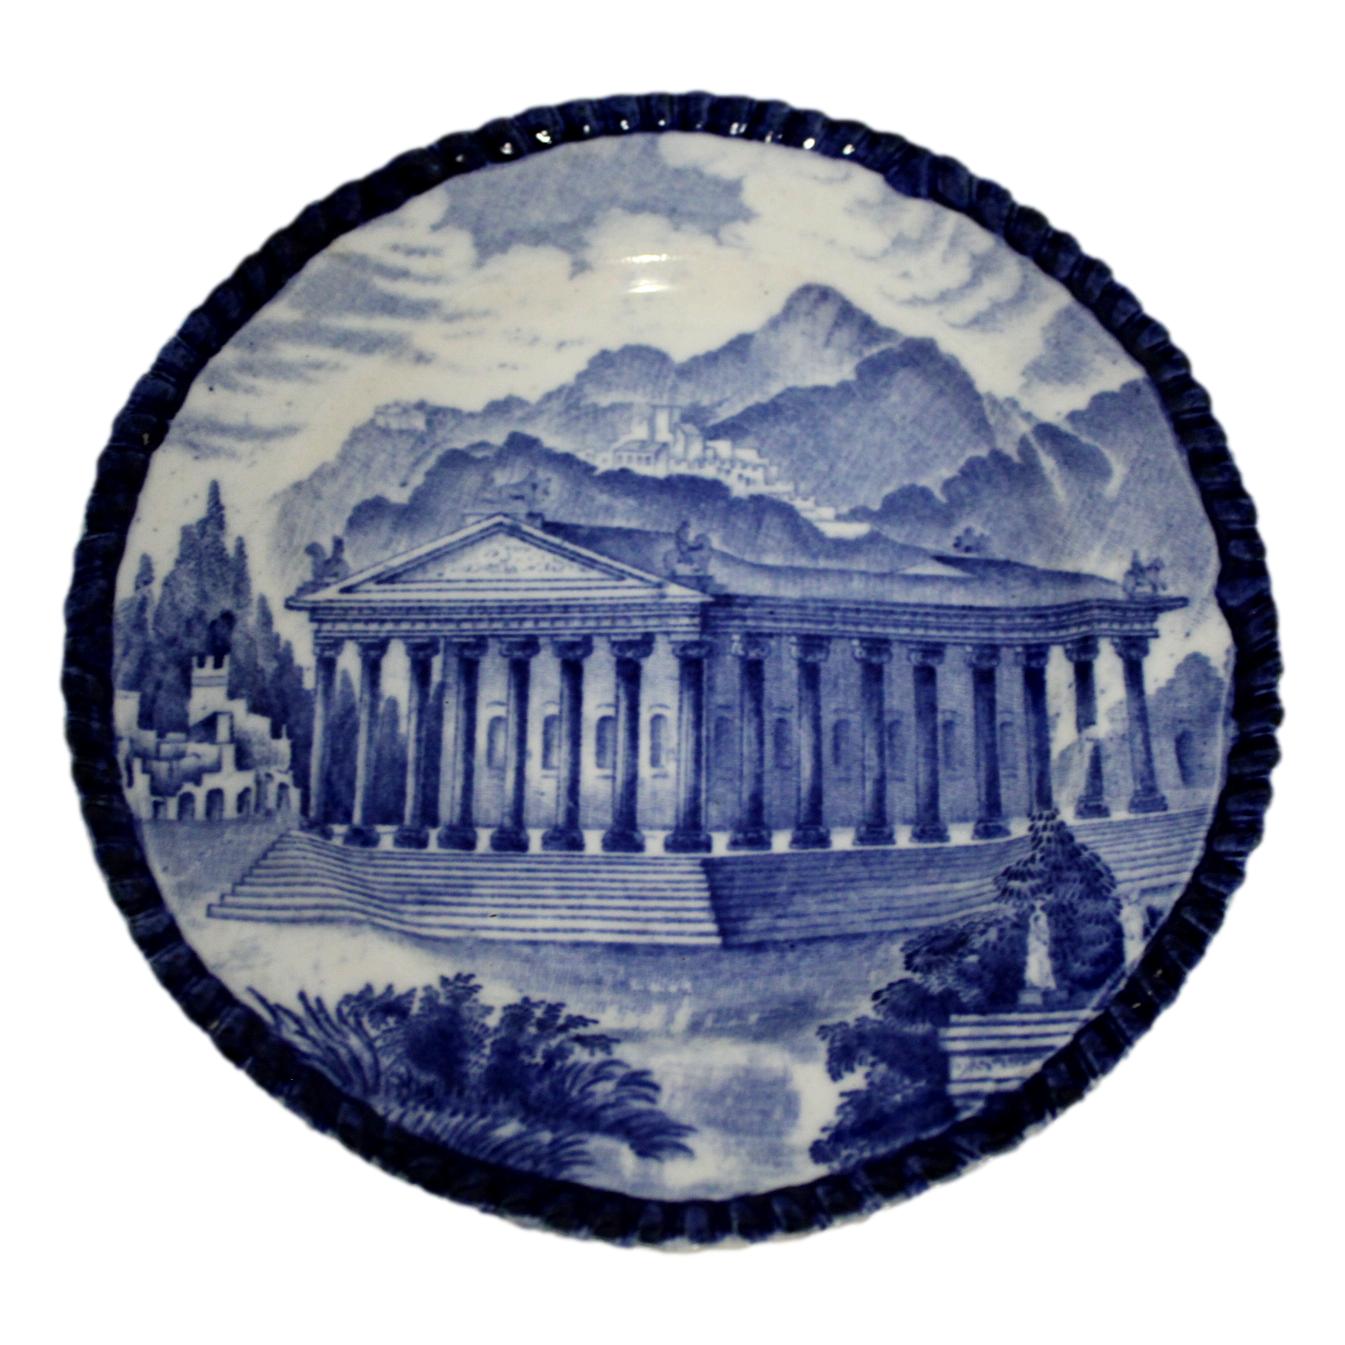 Temple of Diana Plate